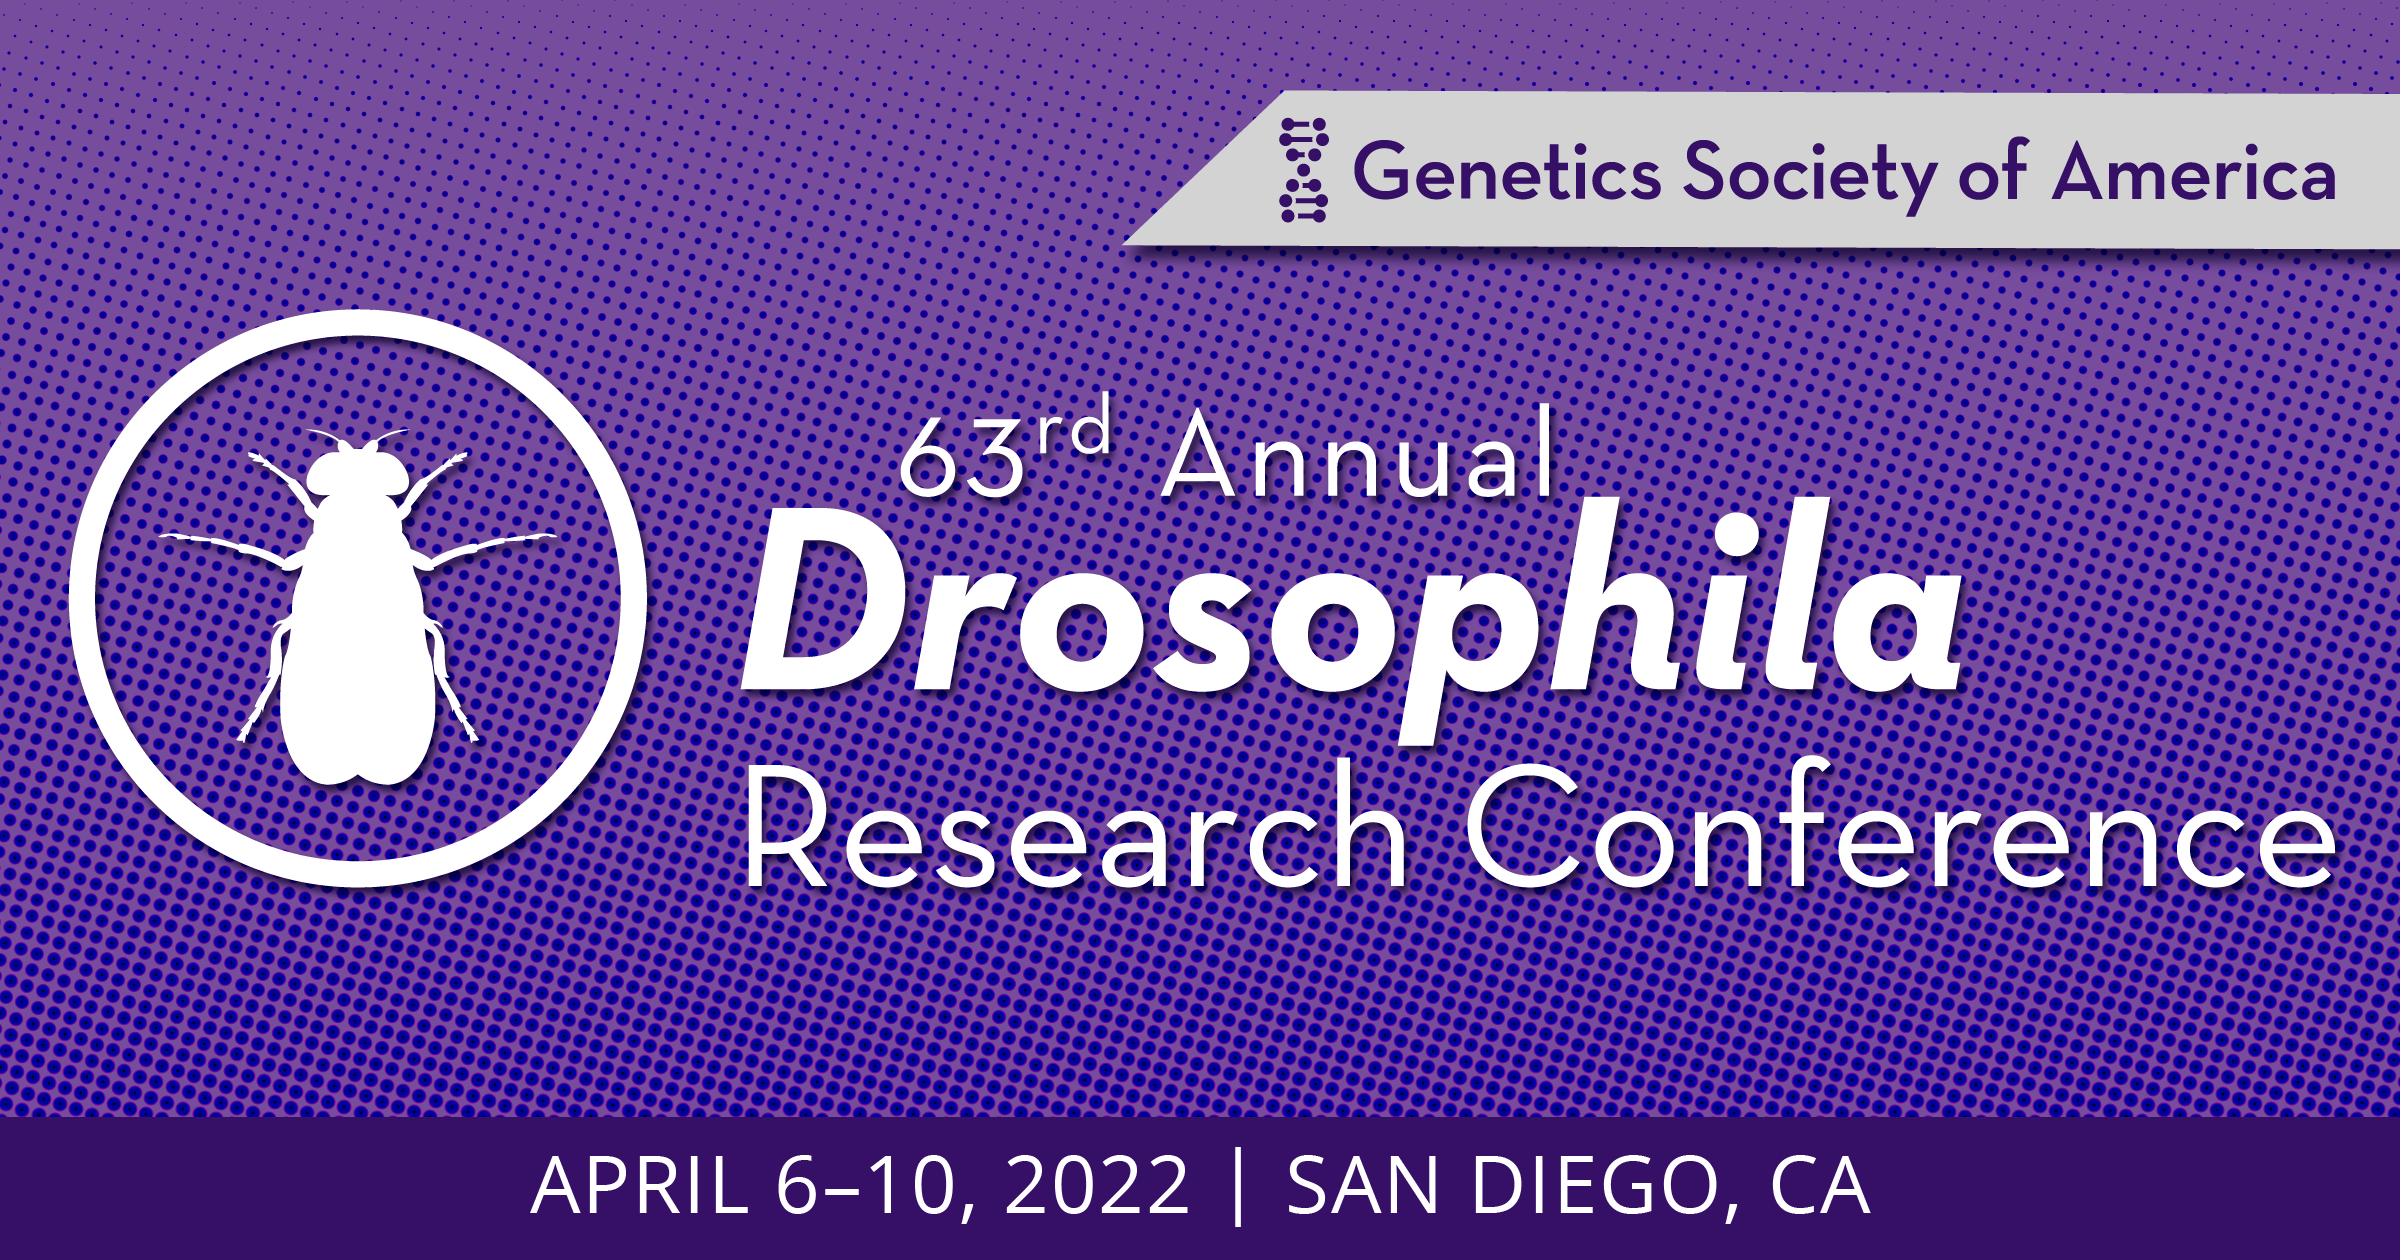 Abstract Submission 63rd Annual Drosophila Research Conference